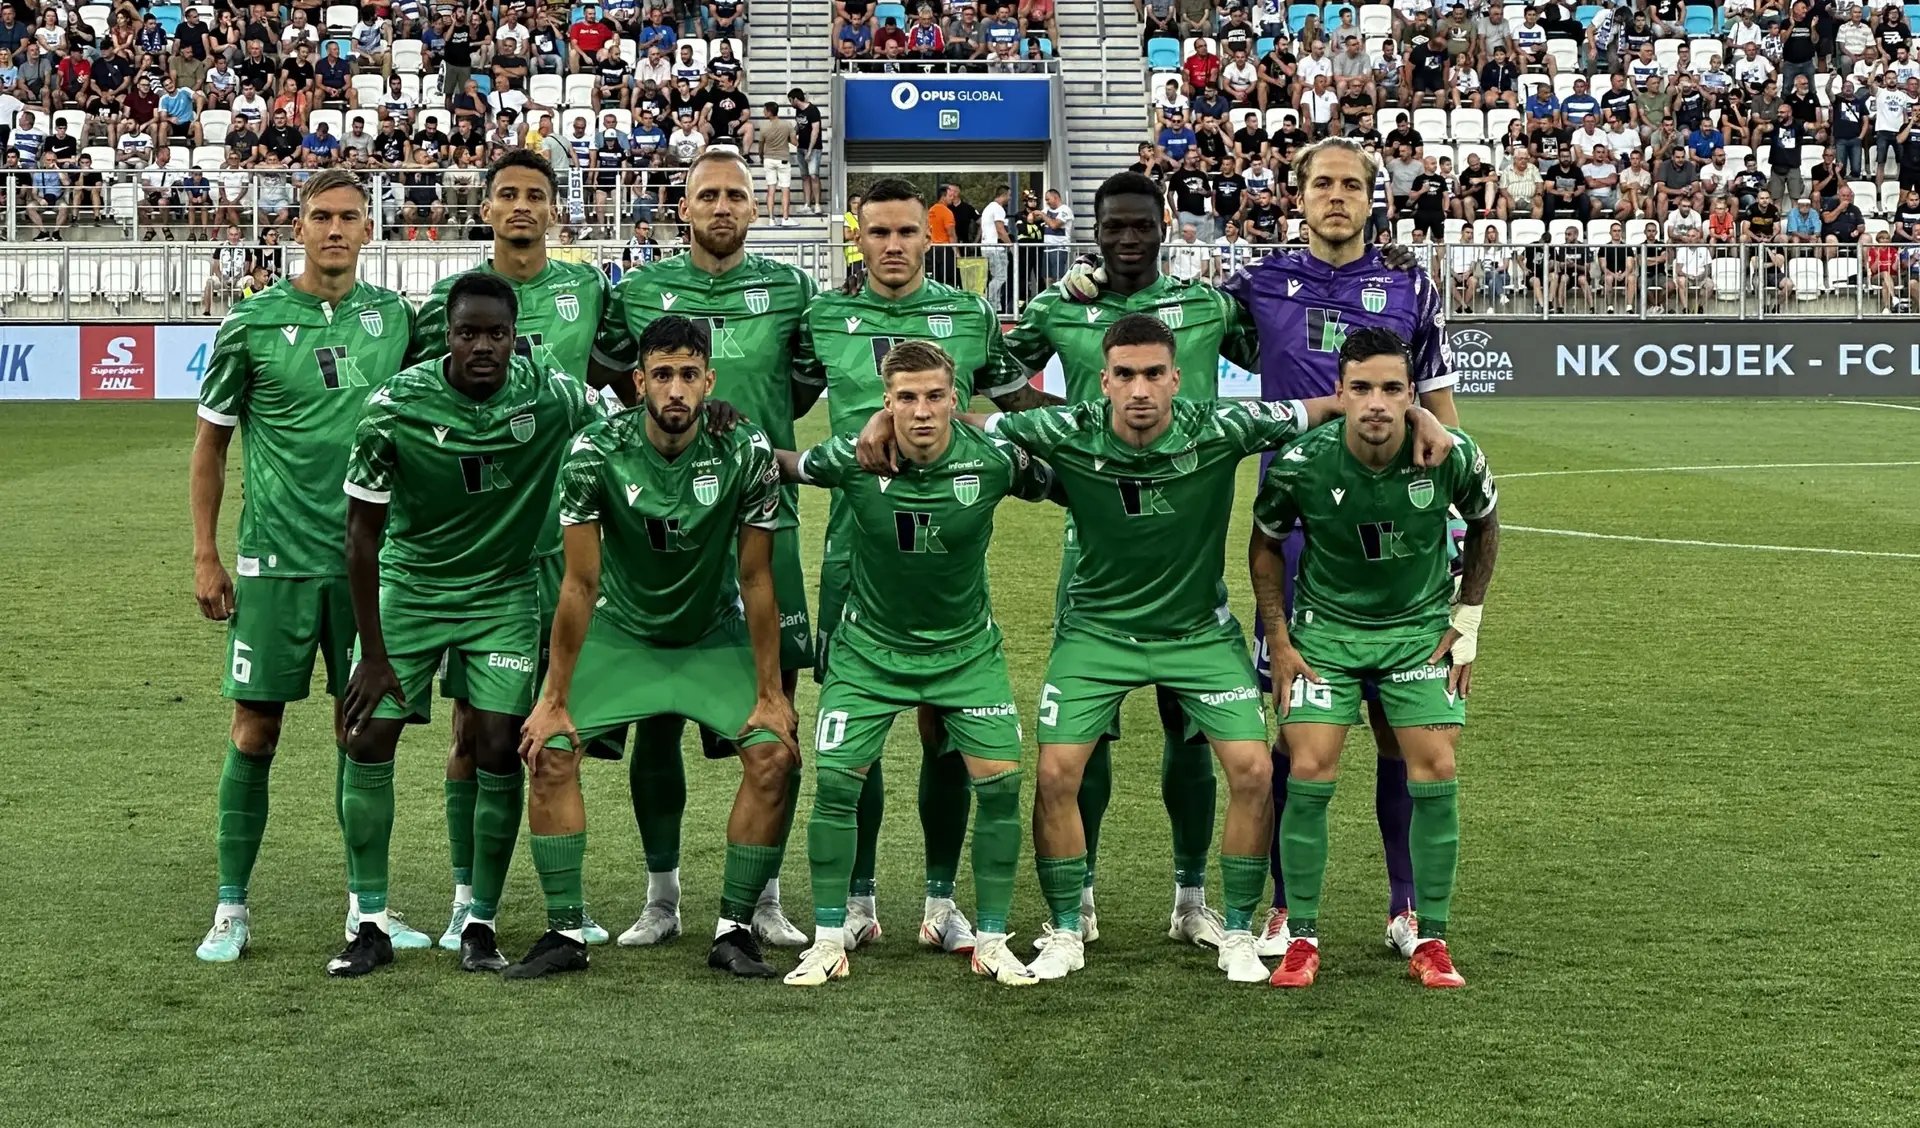 FCI Levadia returns from Croatia with a 5-1 defeat